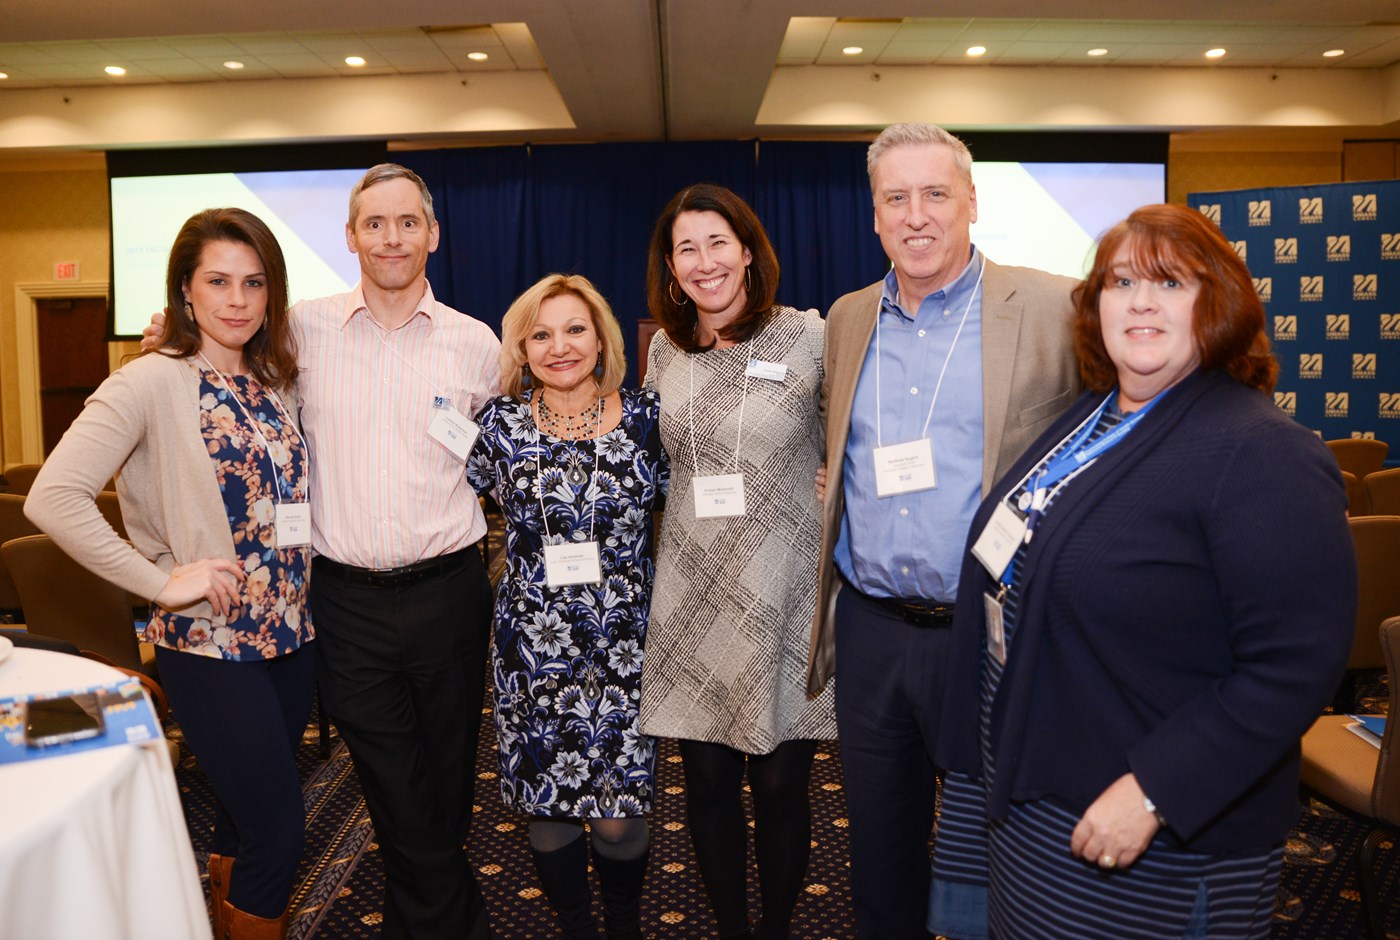 6 people standing together pose for a photo at the 2019 Annual Faculty Symposium with a blue UMass Lowell backdrop and others behind them.